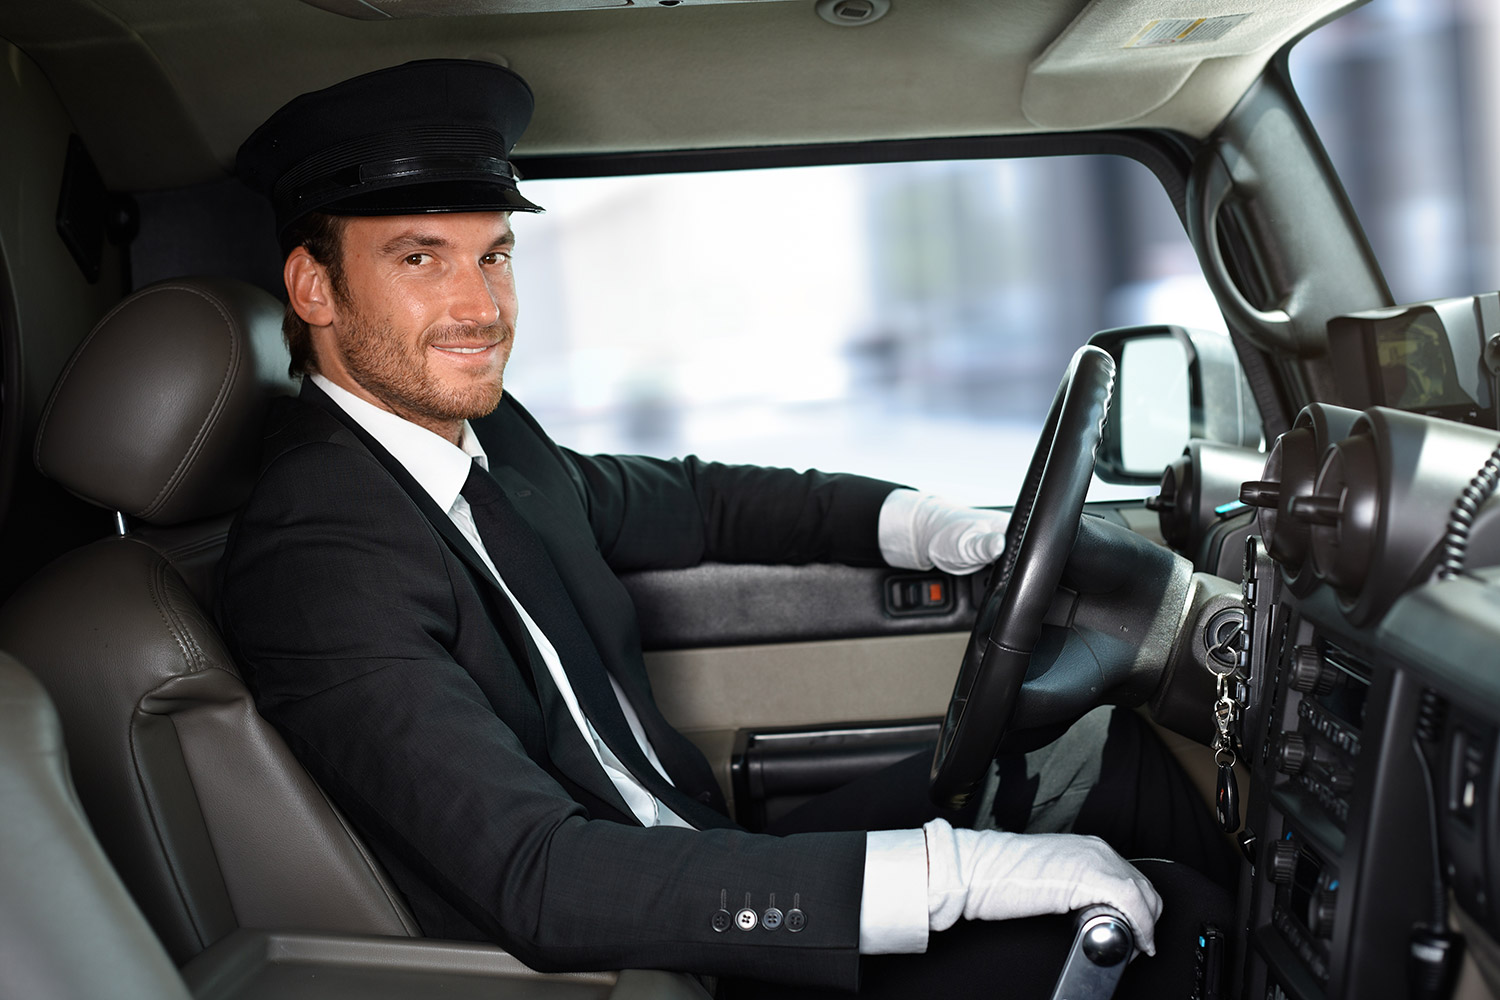 Can You Spell These Fancy French Words That the English Language Has Stolen? Chauffeur